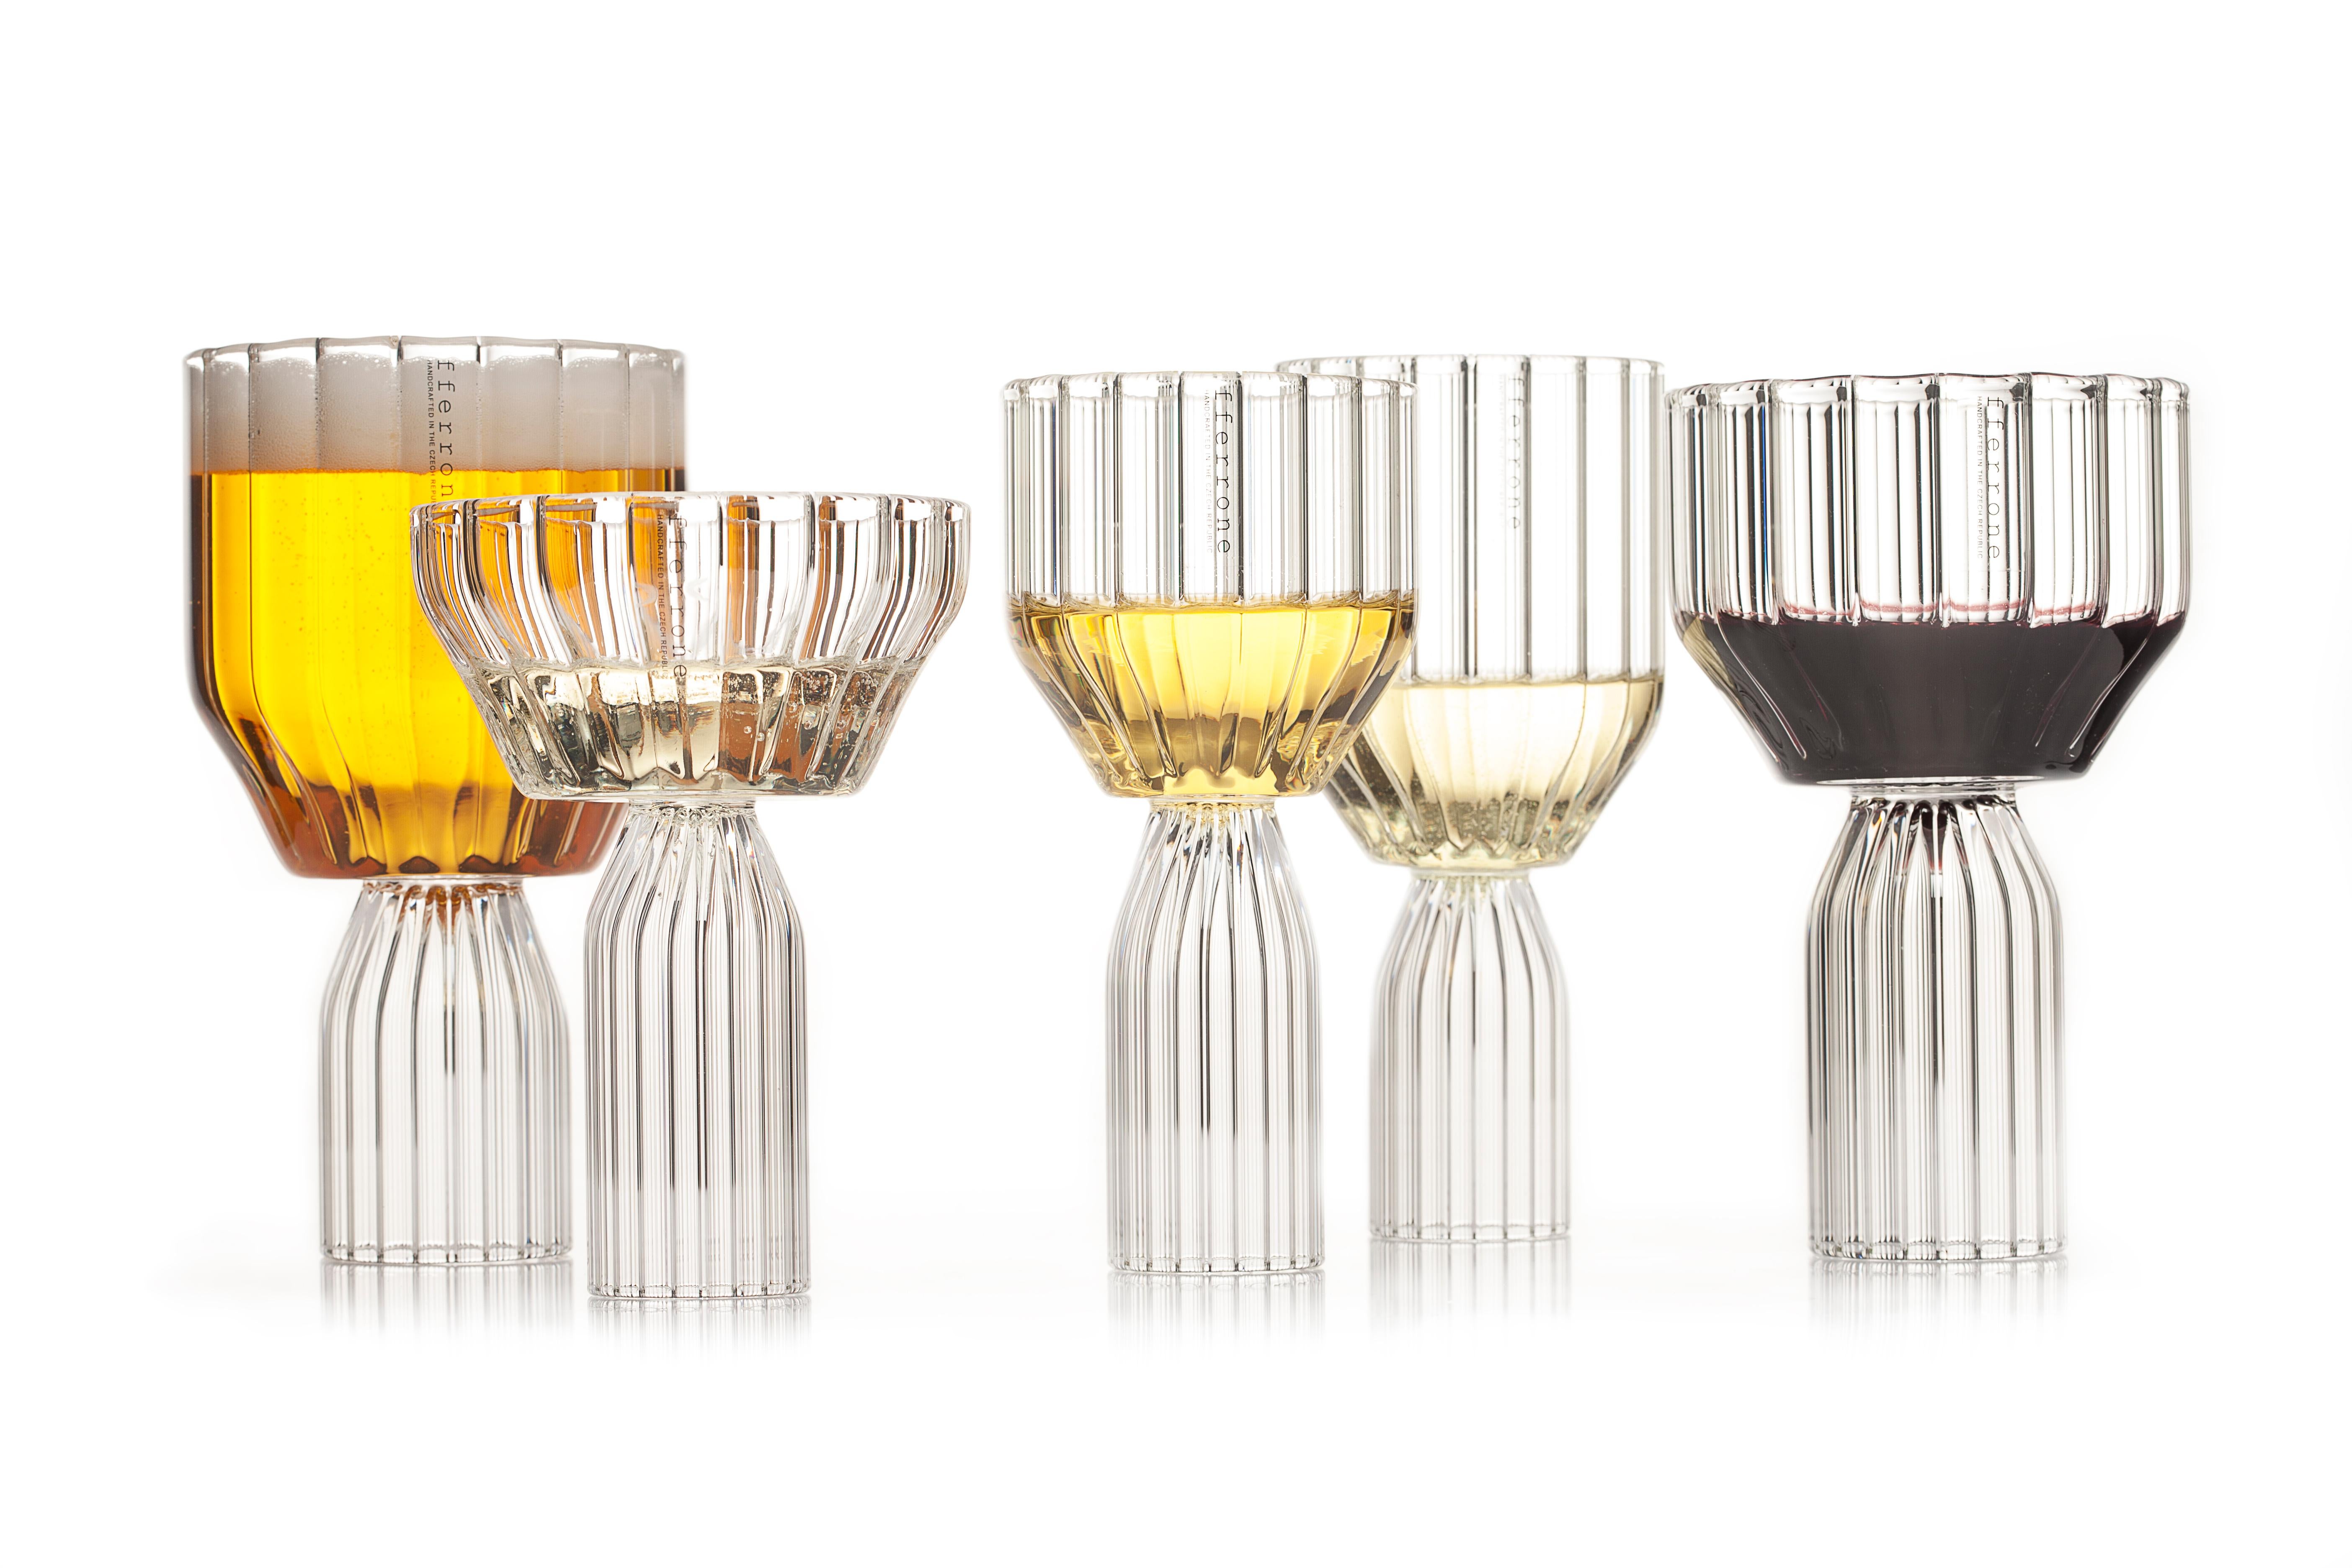 Czech EU Clients Contemporary Margot Champagne Coupe Glasses Handcrafted, in Stock